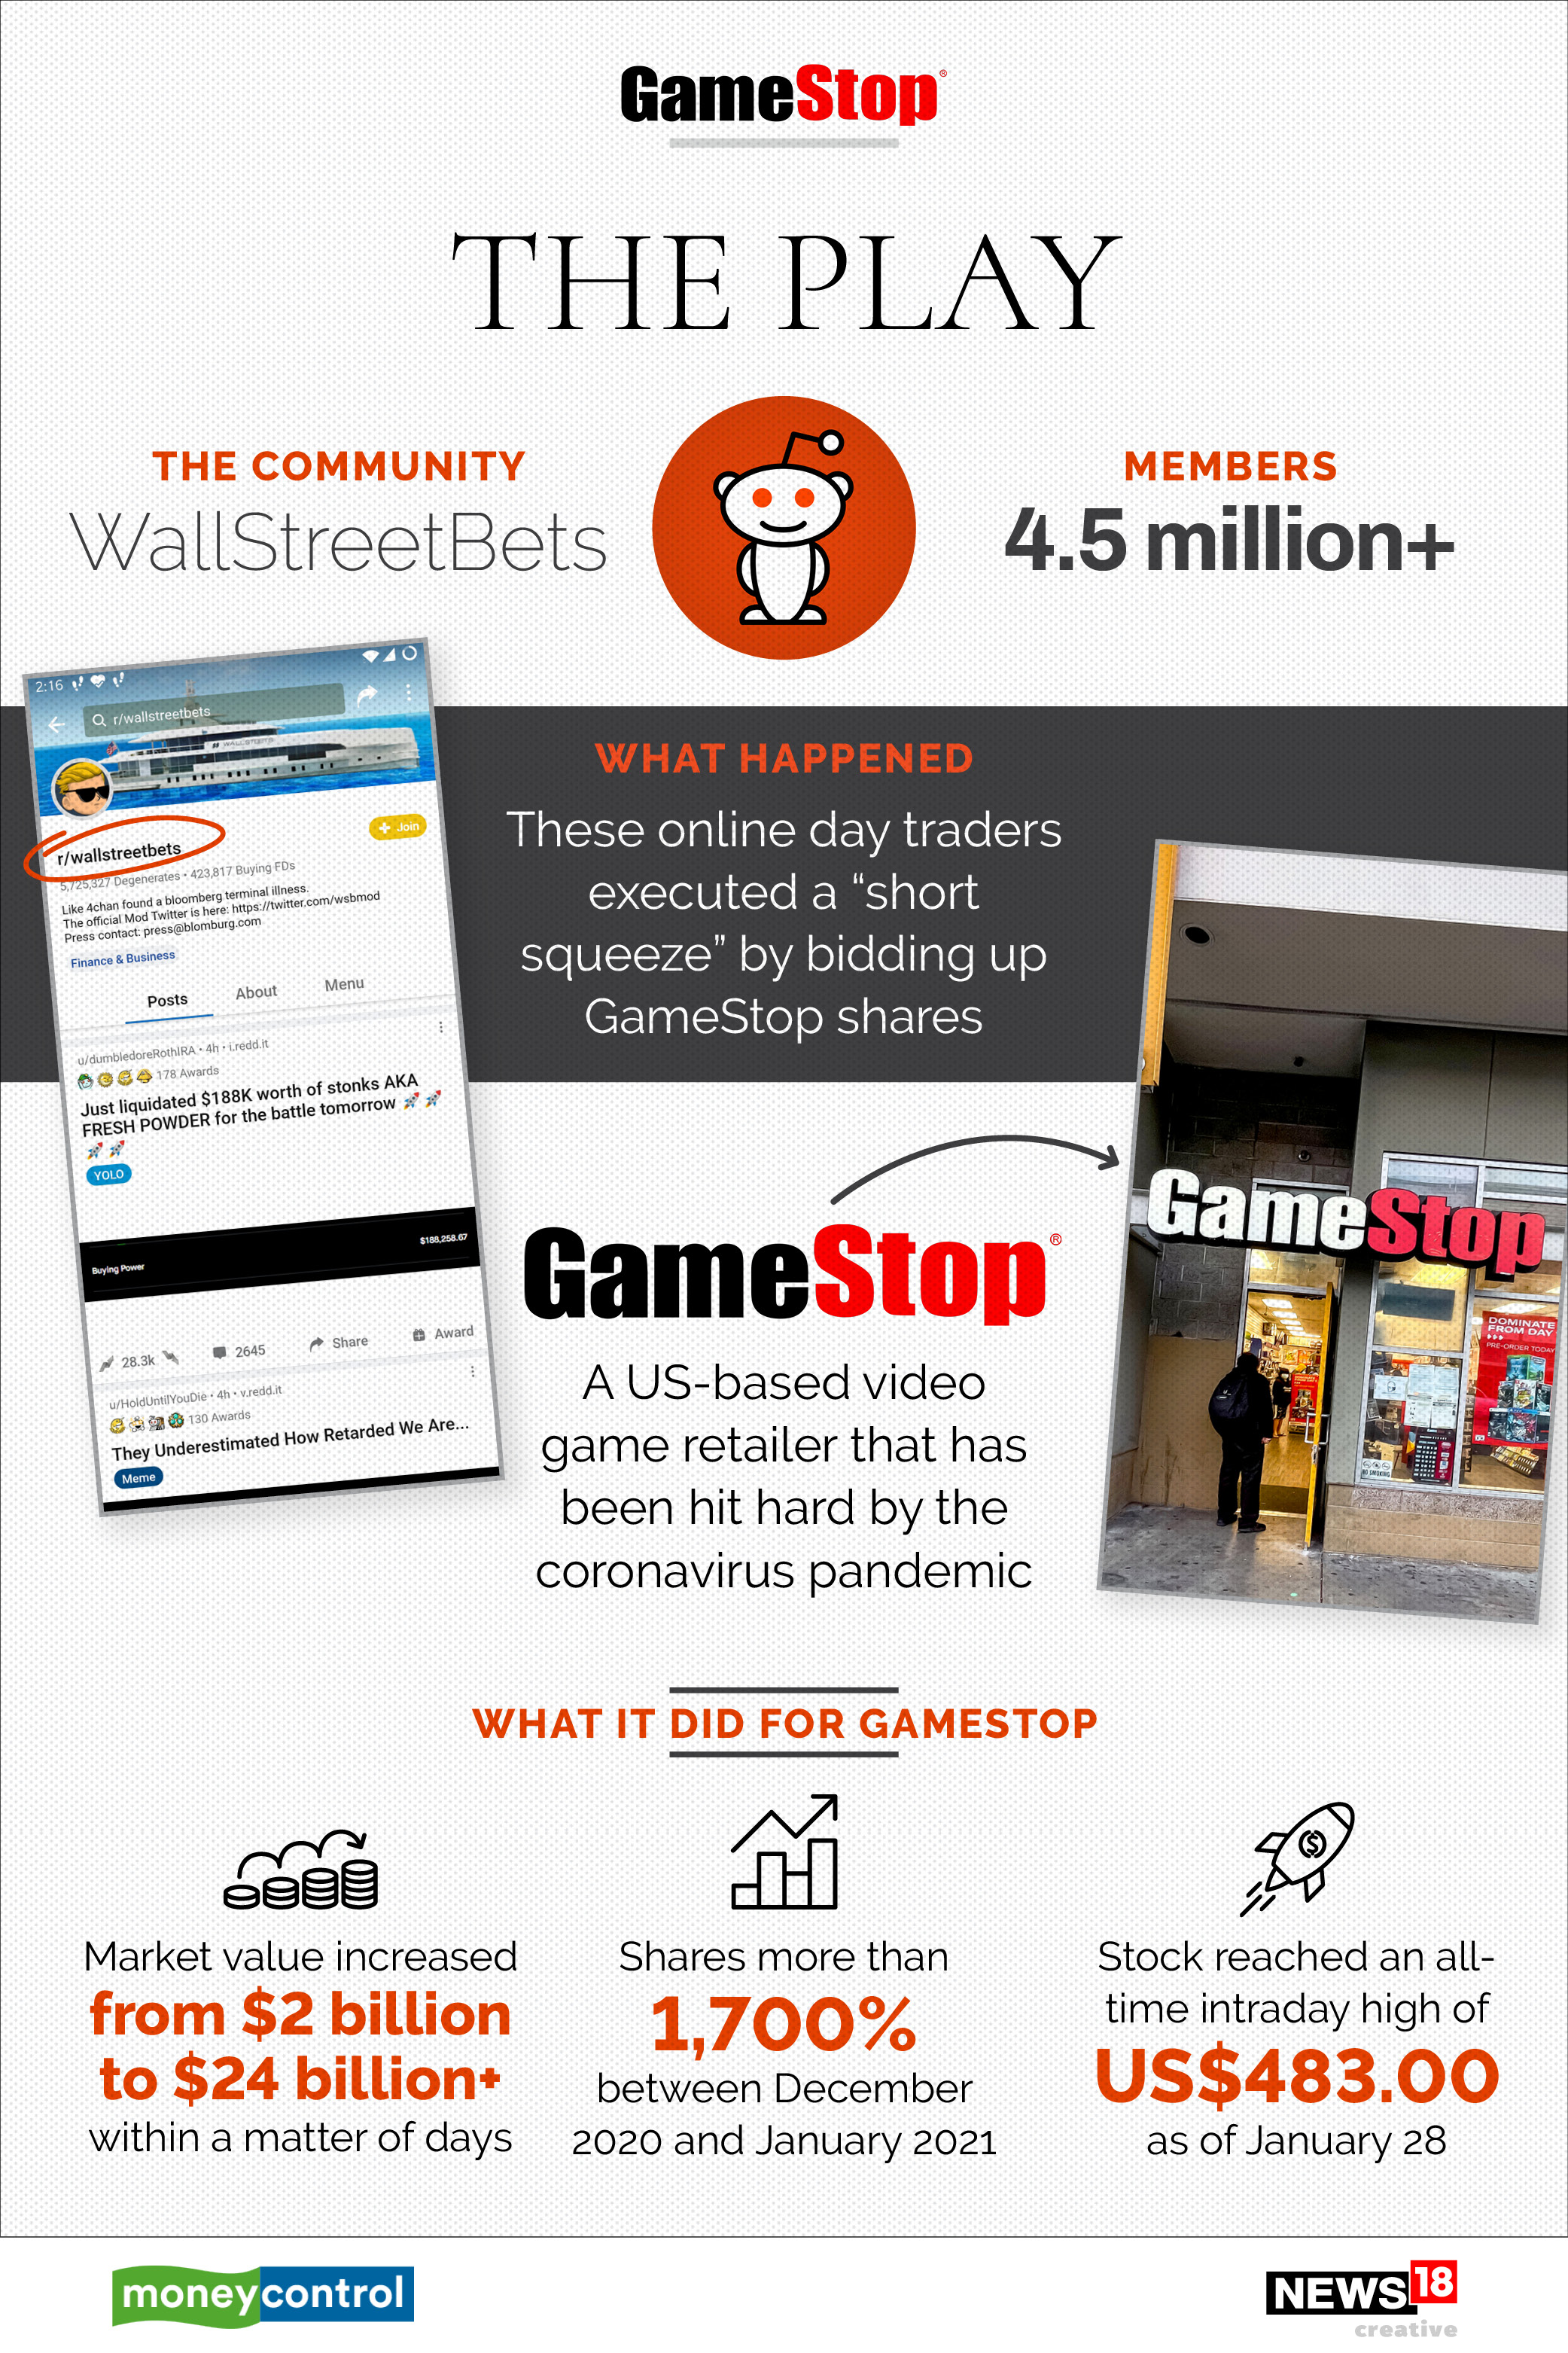 GameStop: Everything you need to know about the wild surge and the aftermath